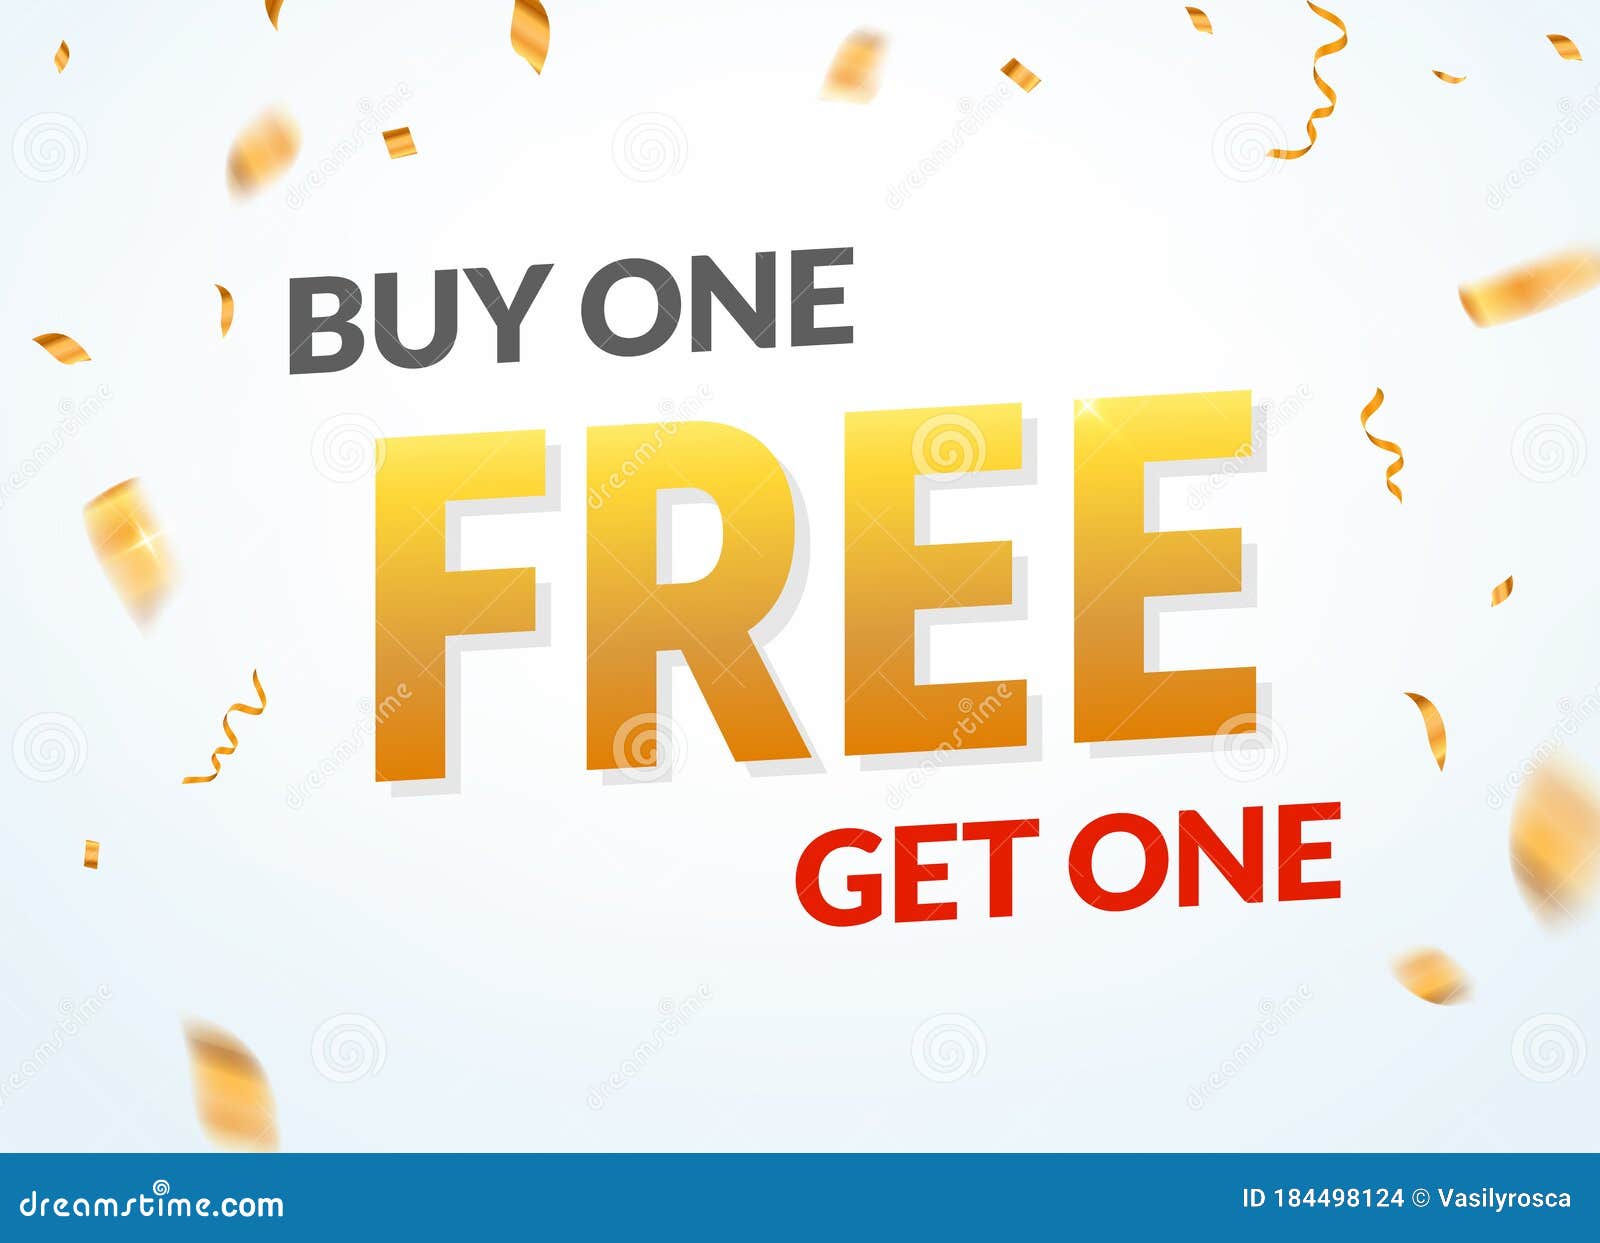 Buy One Get One Free Sale Offer Design Vector Promo Buy 1 Get One Free